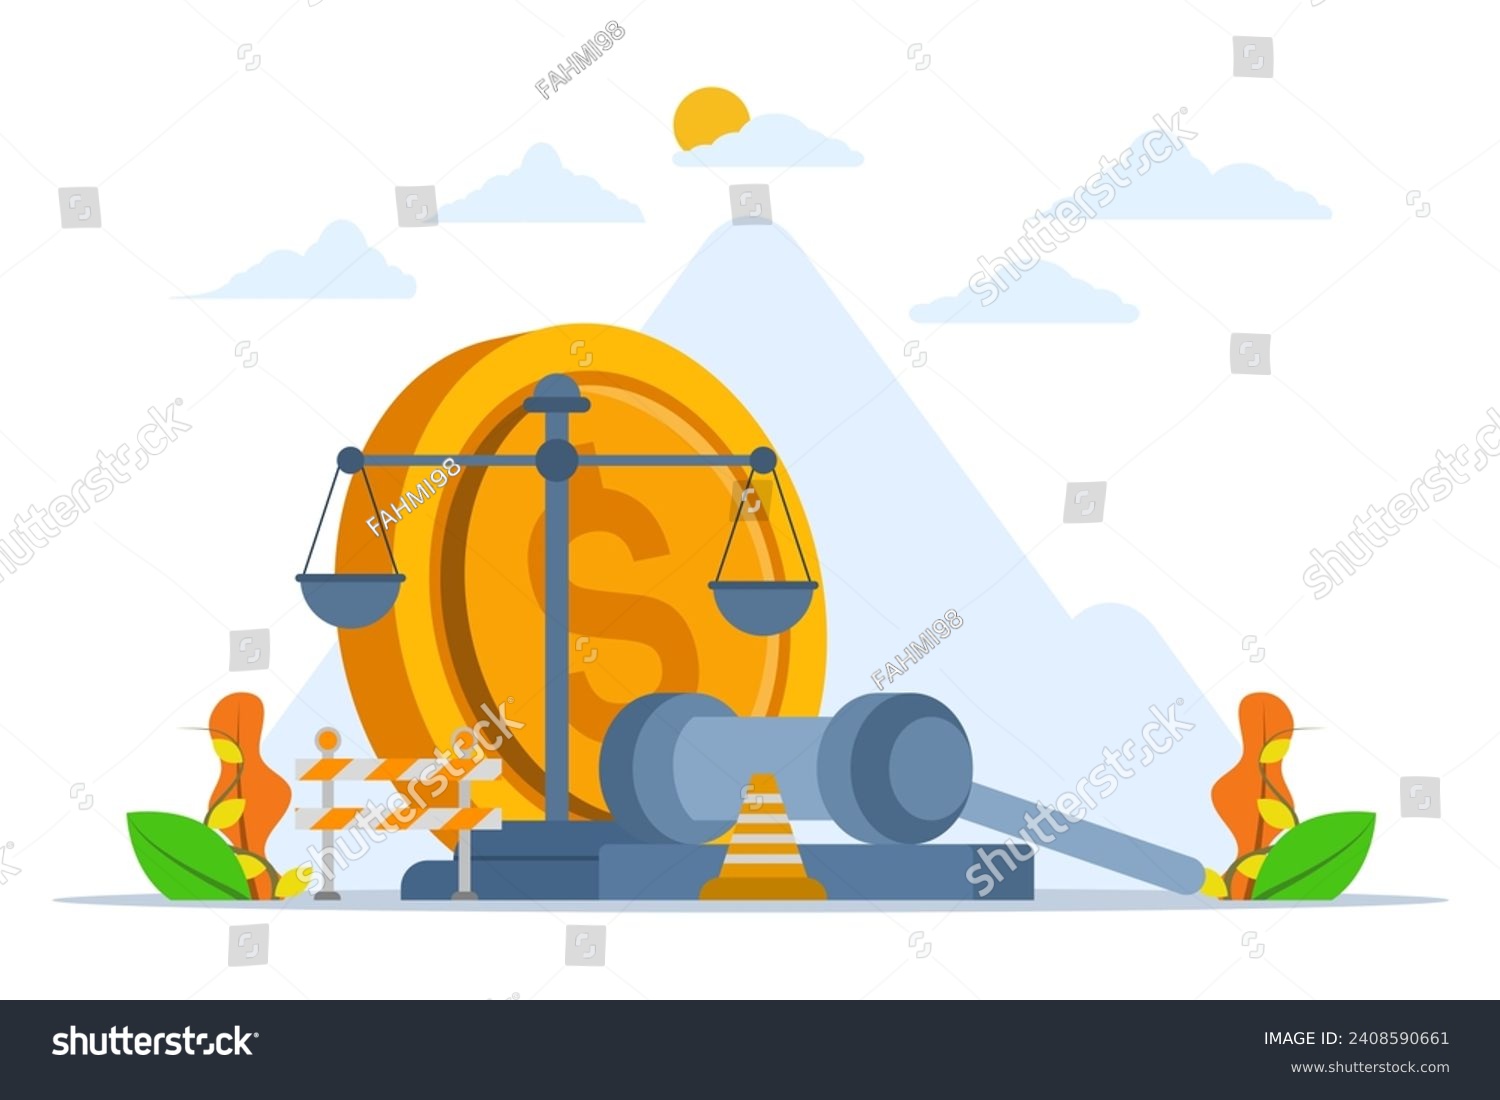 SVG of legal or law concept to compensate payment, hammer of justice with dollar bill symbol and accident pole. Workers' compensation, wage replacement insurance, employee injury benefits. flat vector. svg